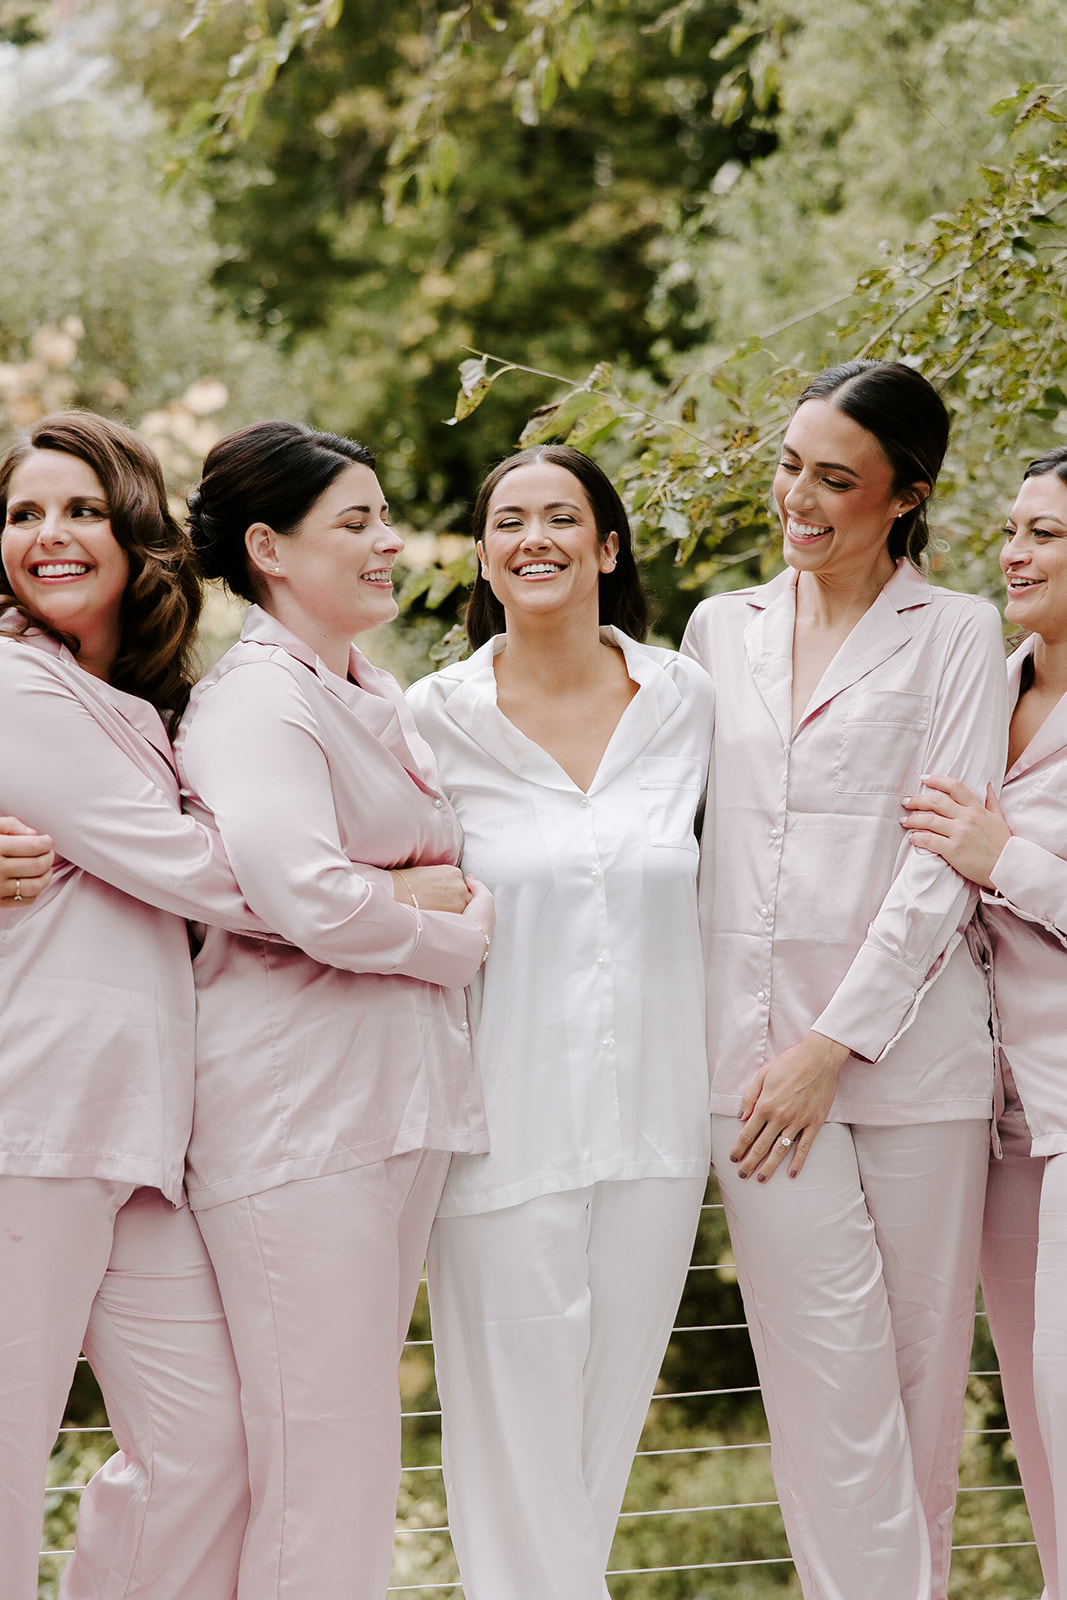 Bridesmaids pose with the stunning bride before her dreamy New England wedding day